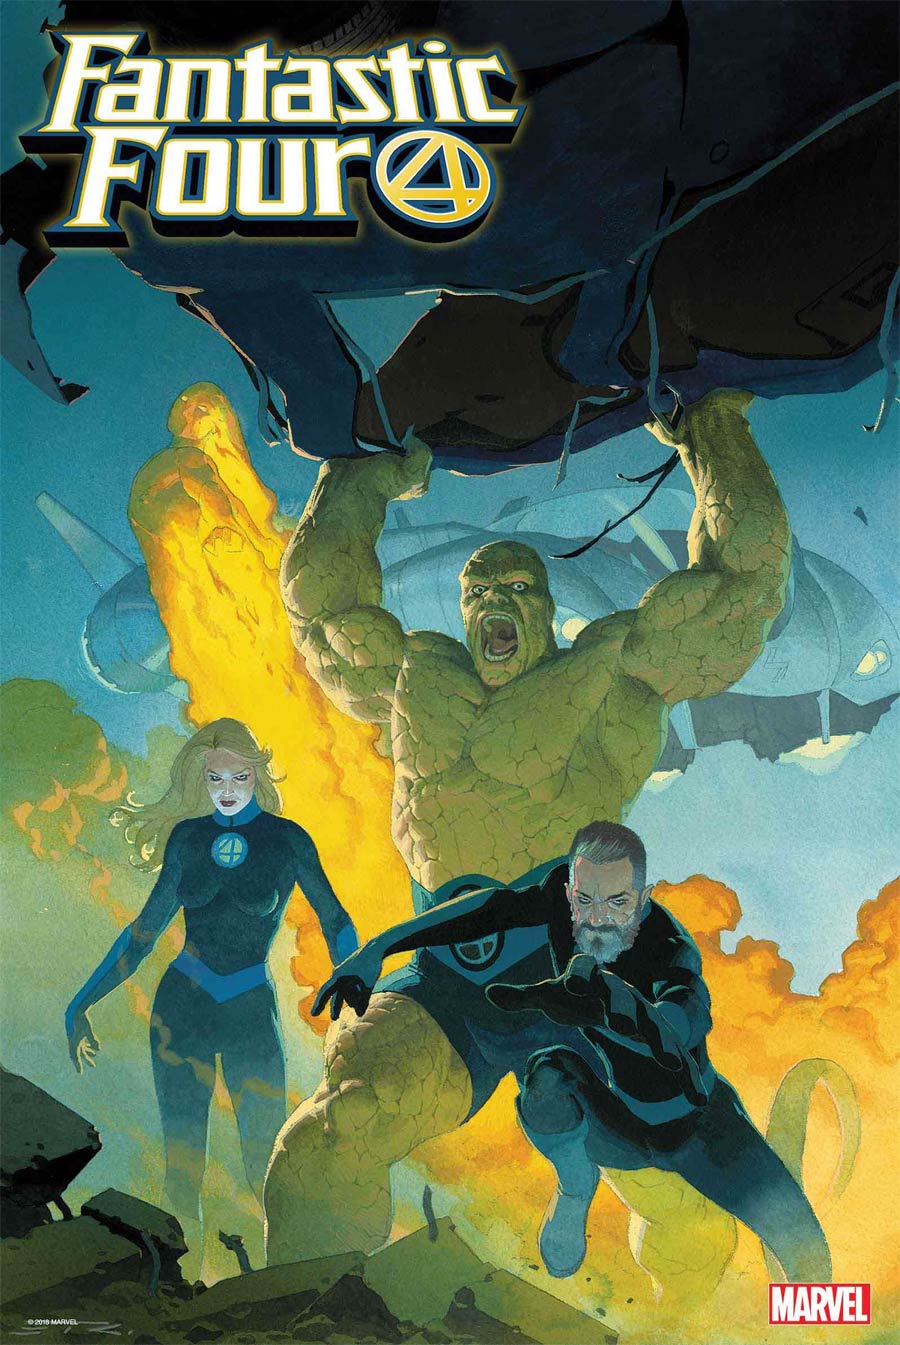 Fantastic Four 2018 By Esad Ribic Poster